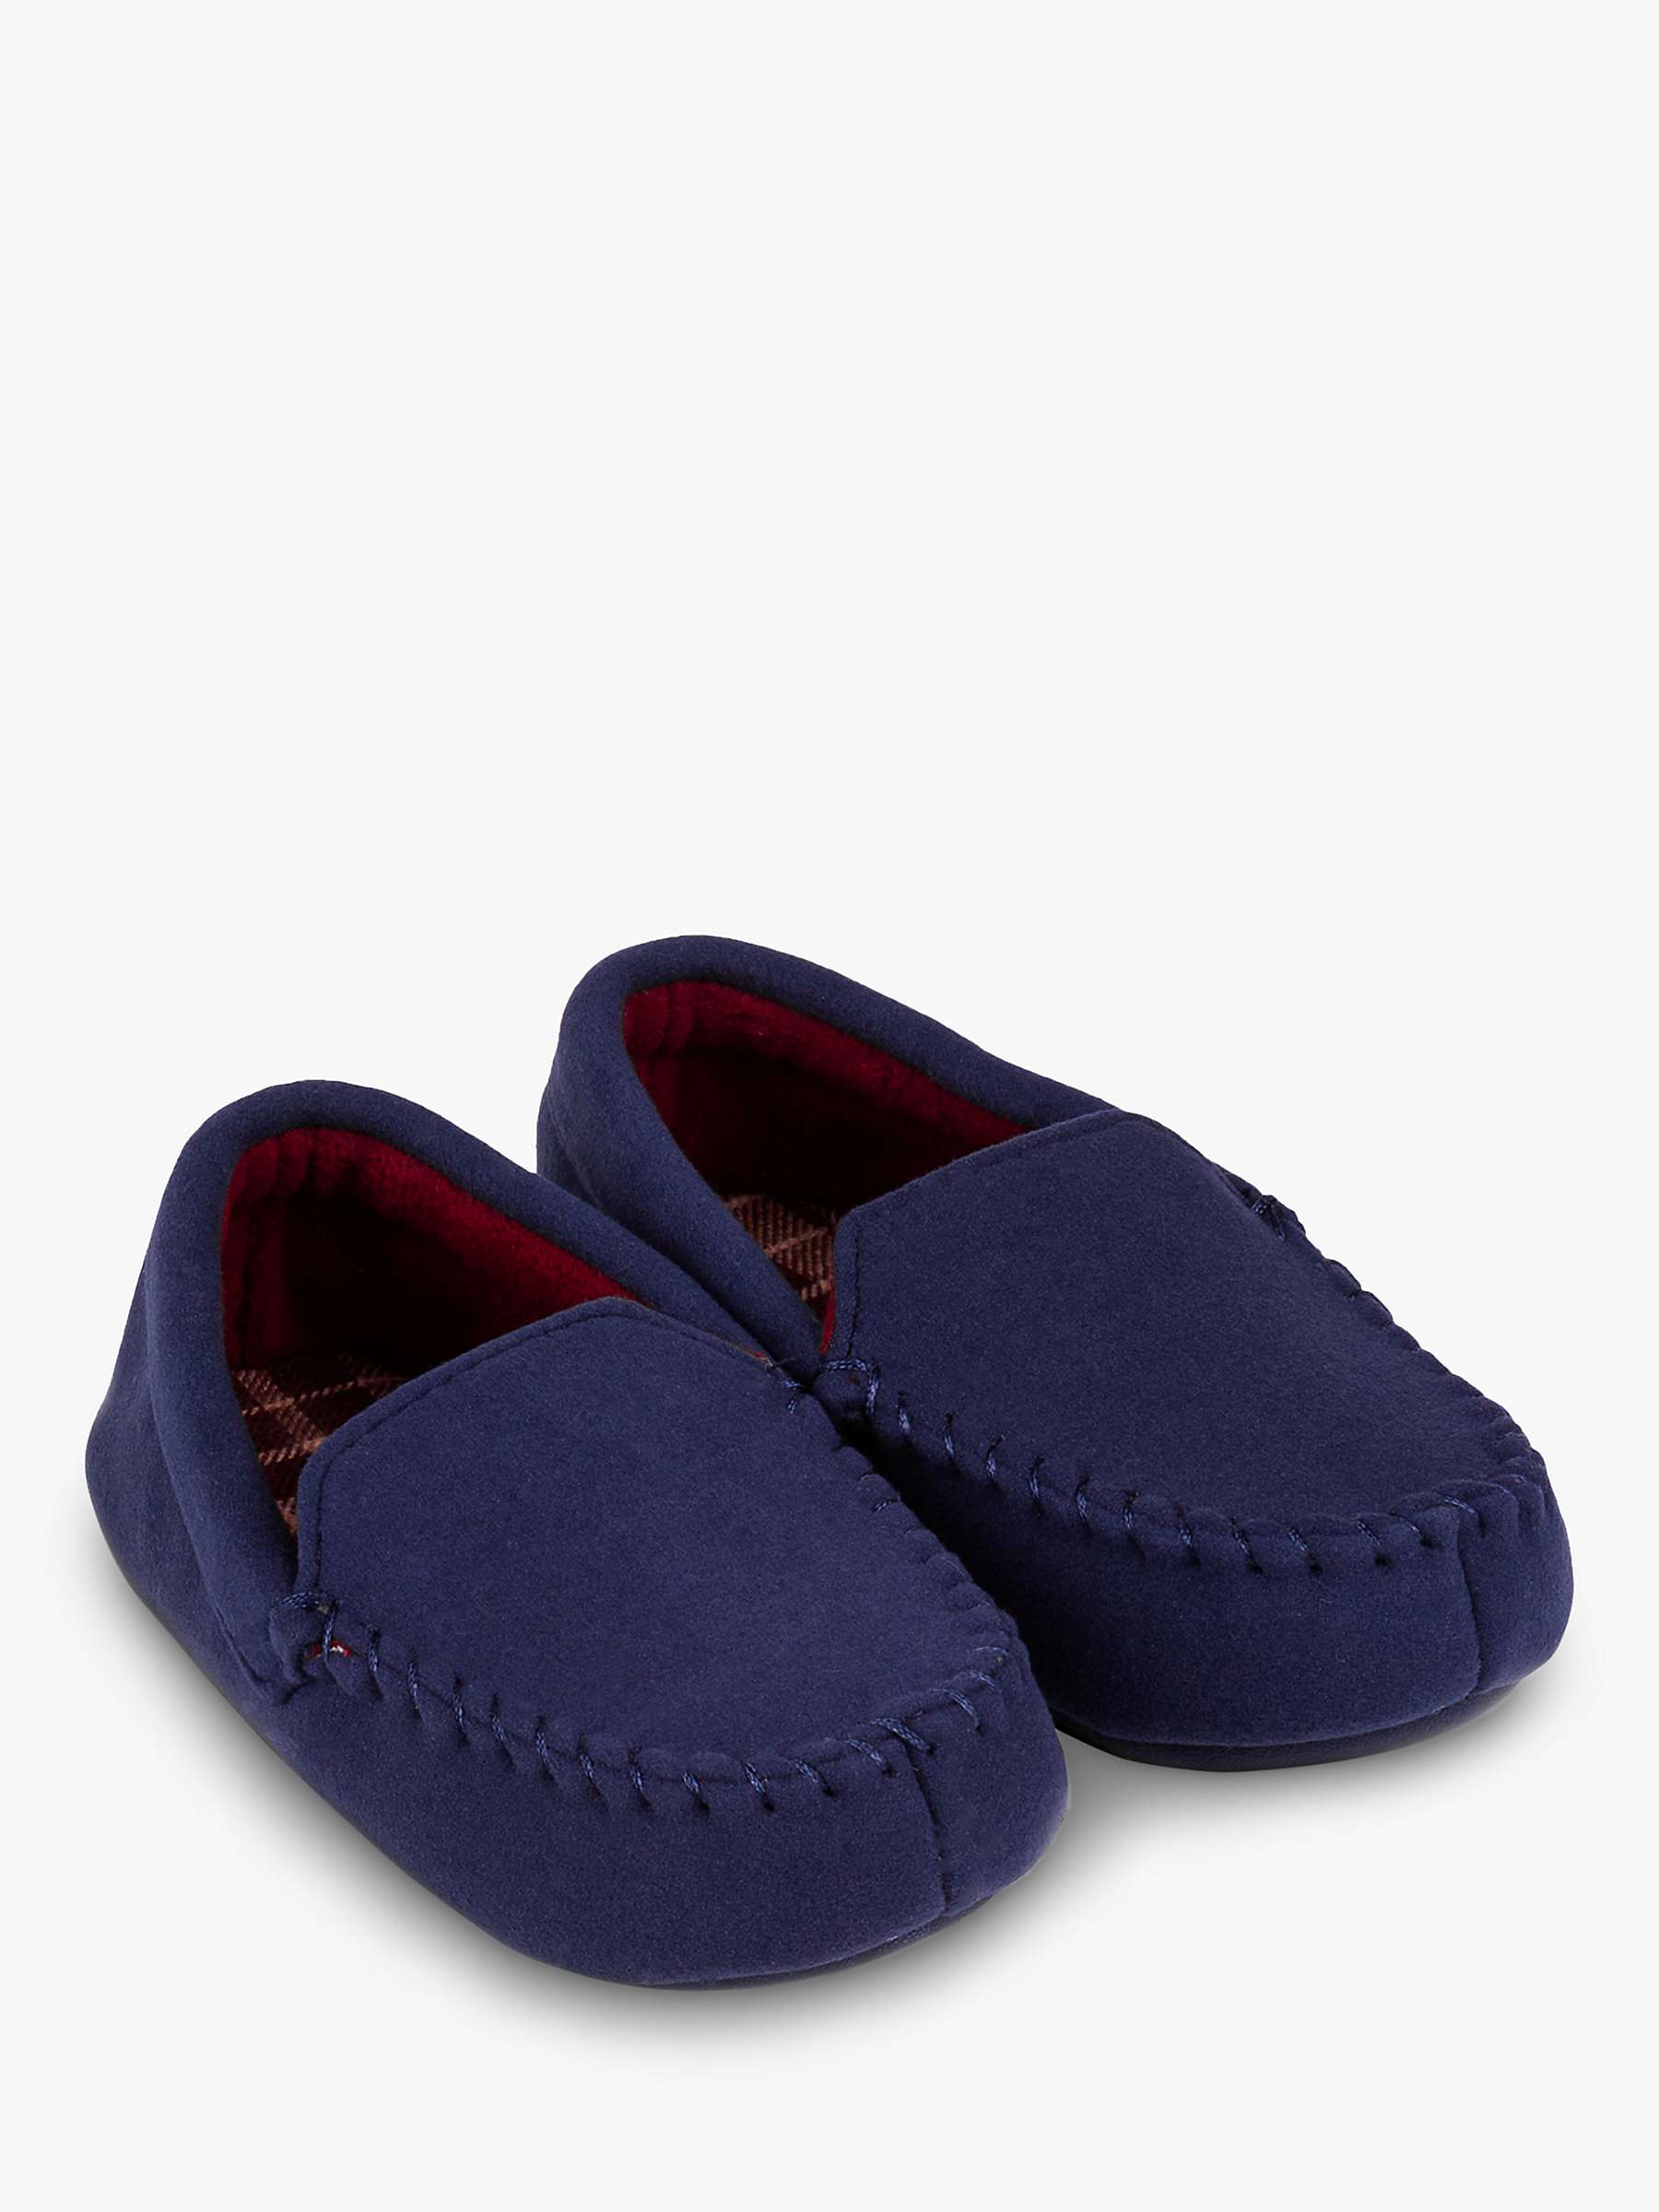 Buy totes Kids' Moccasin Slippers Online at johnlewis.com